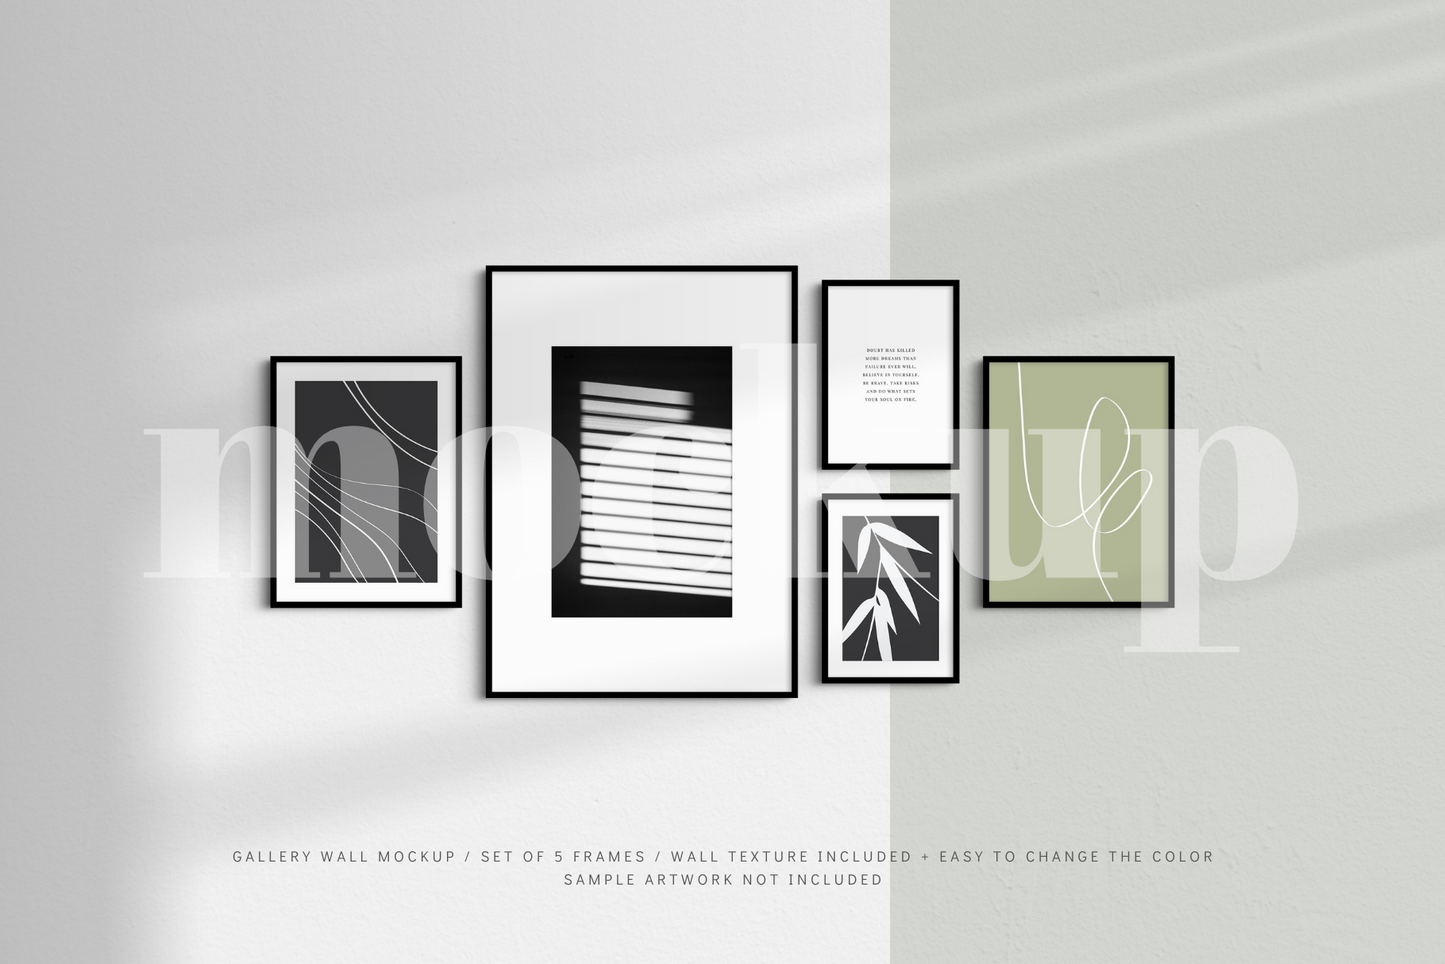 A gallery wall mockup that features a set of 5 vertical black frames.